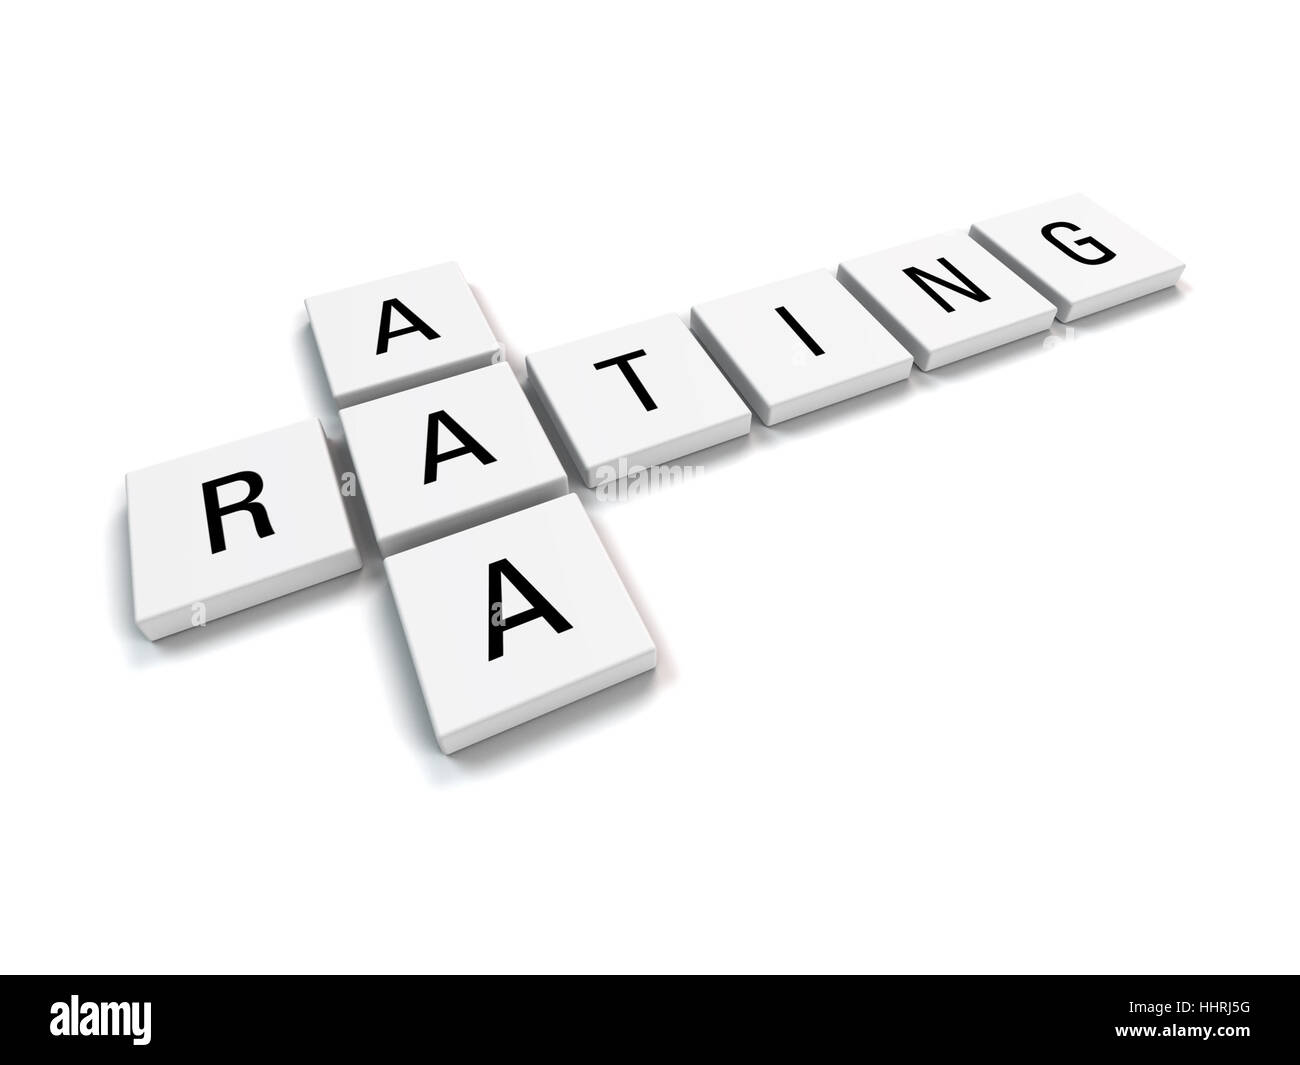 metaphorical image concerning credit rating AAA Stock Photo